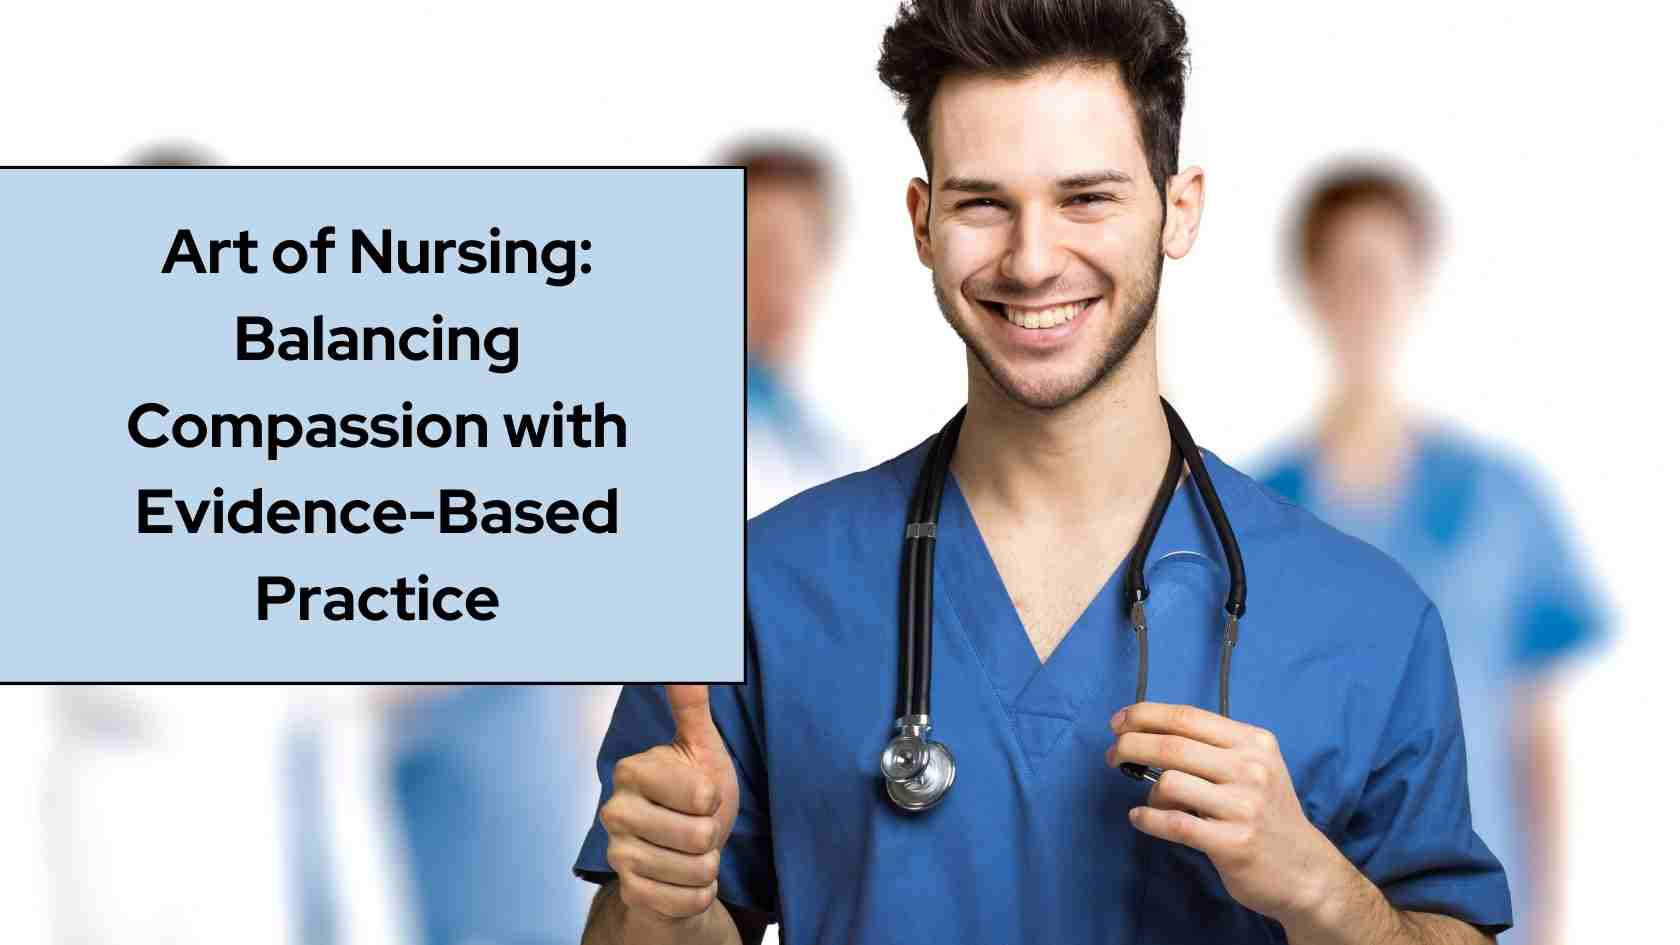 The Art of Nursing: Balancing Compassion with Evidence-Based Practice